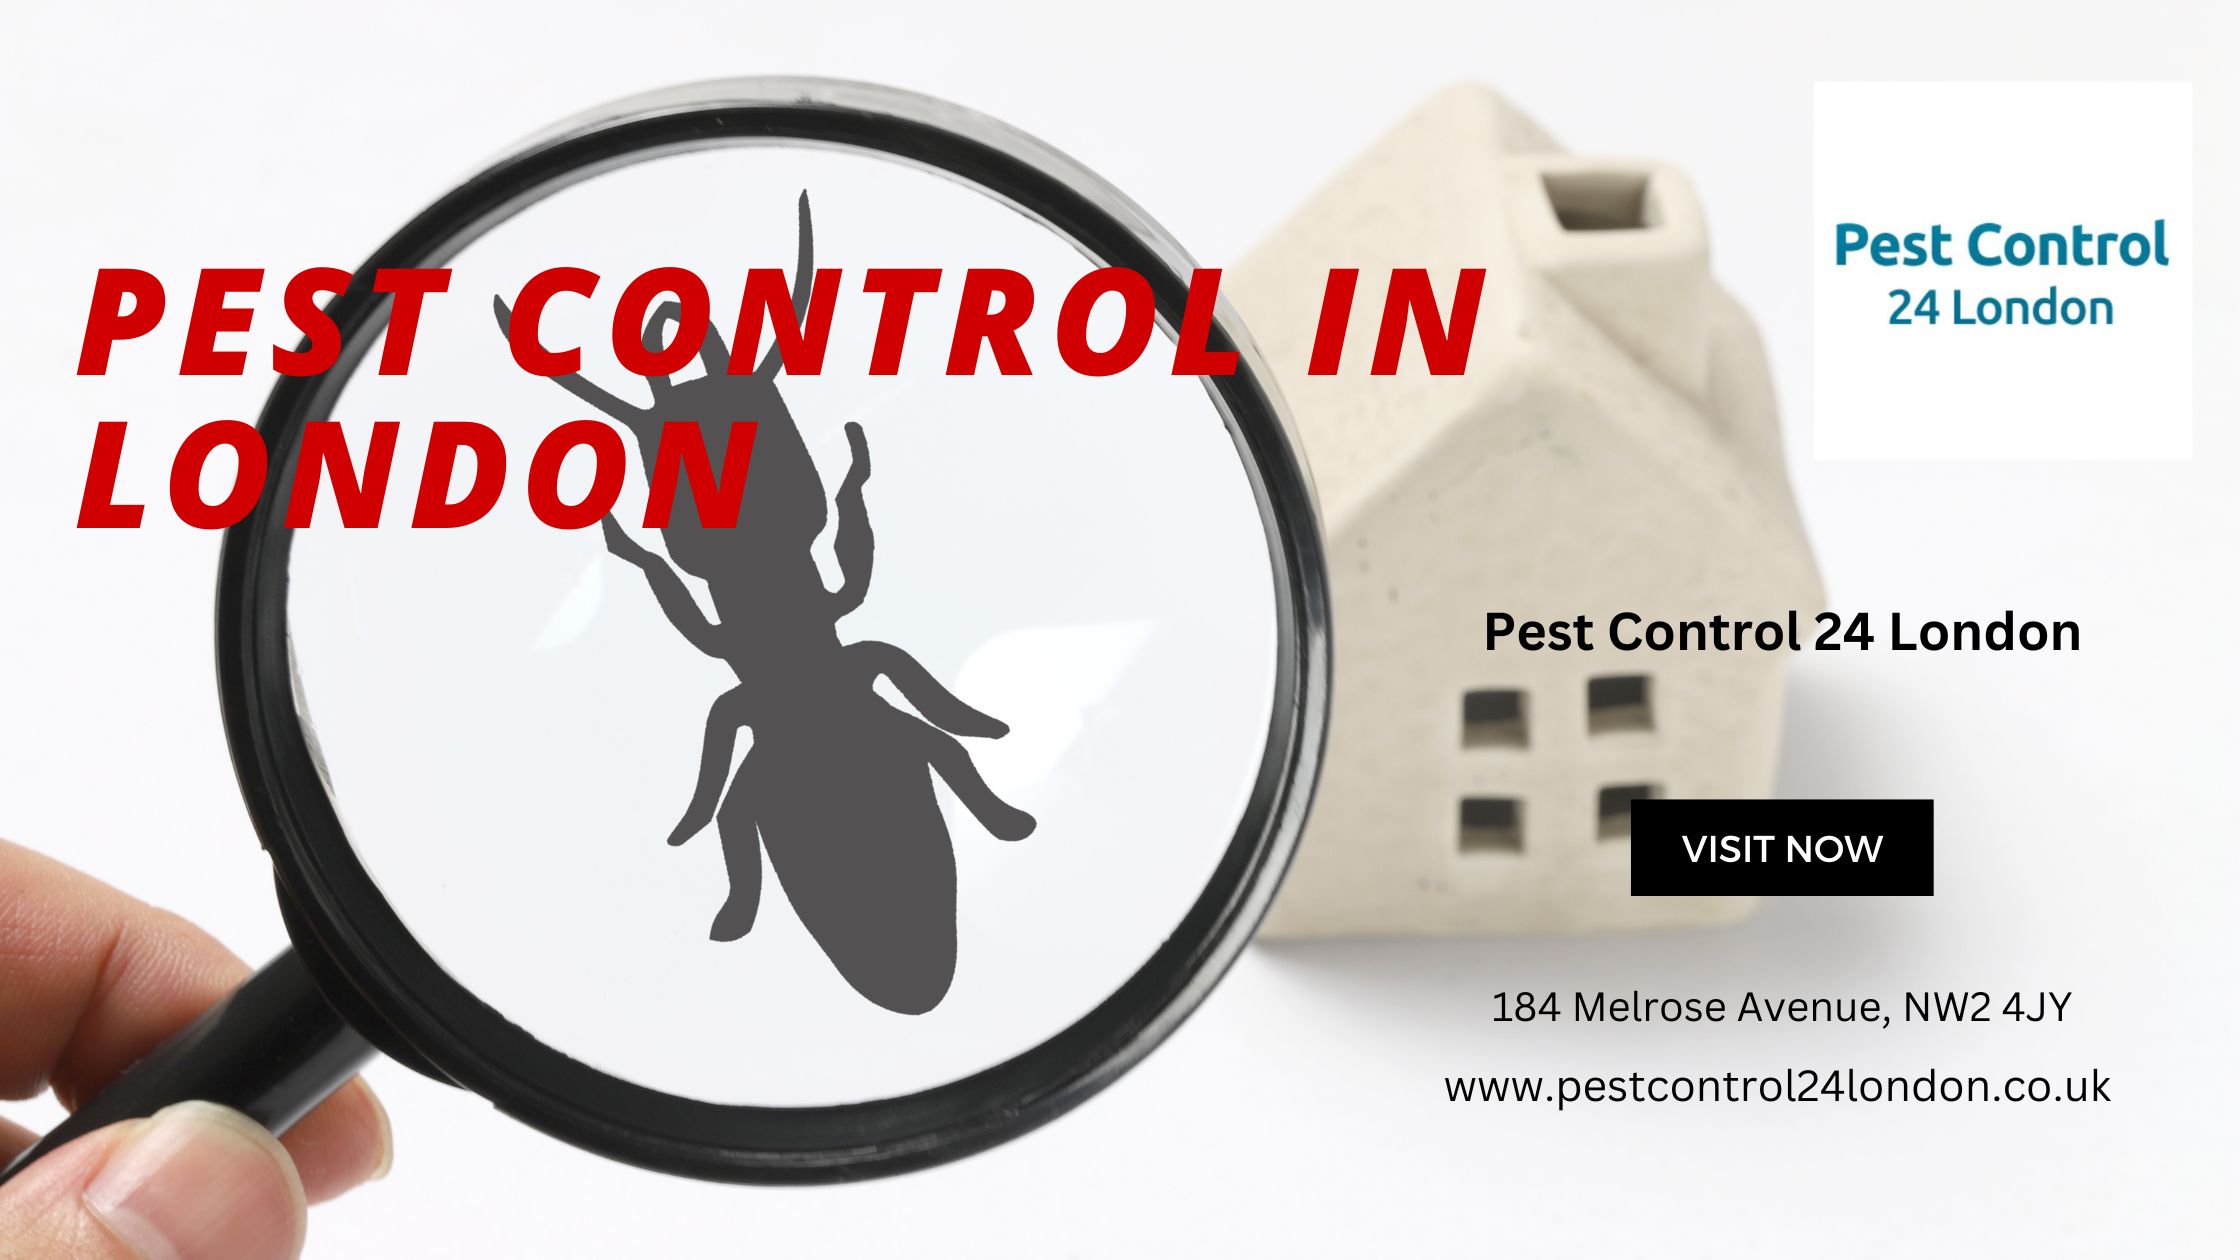 Pest Control in London: Regaining Control of Your Home